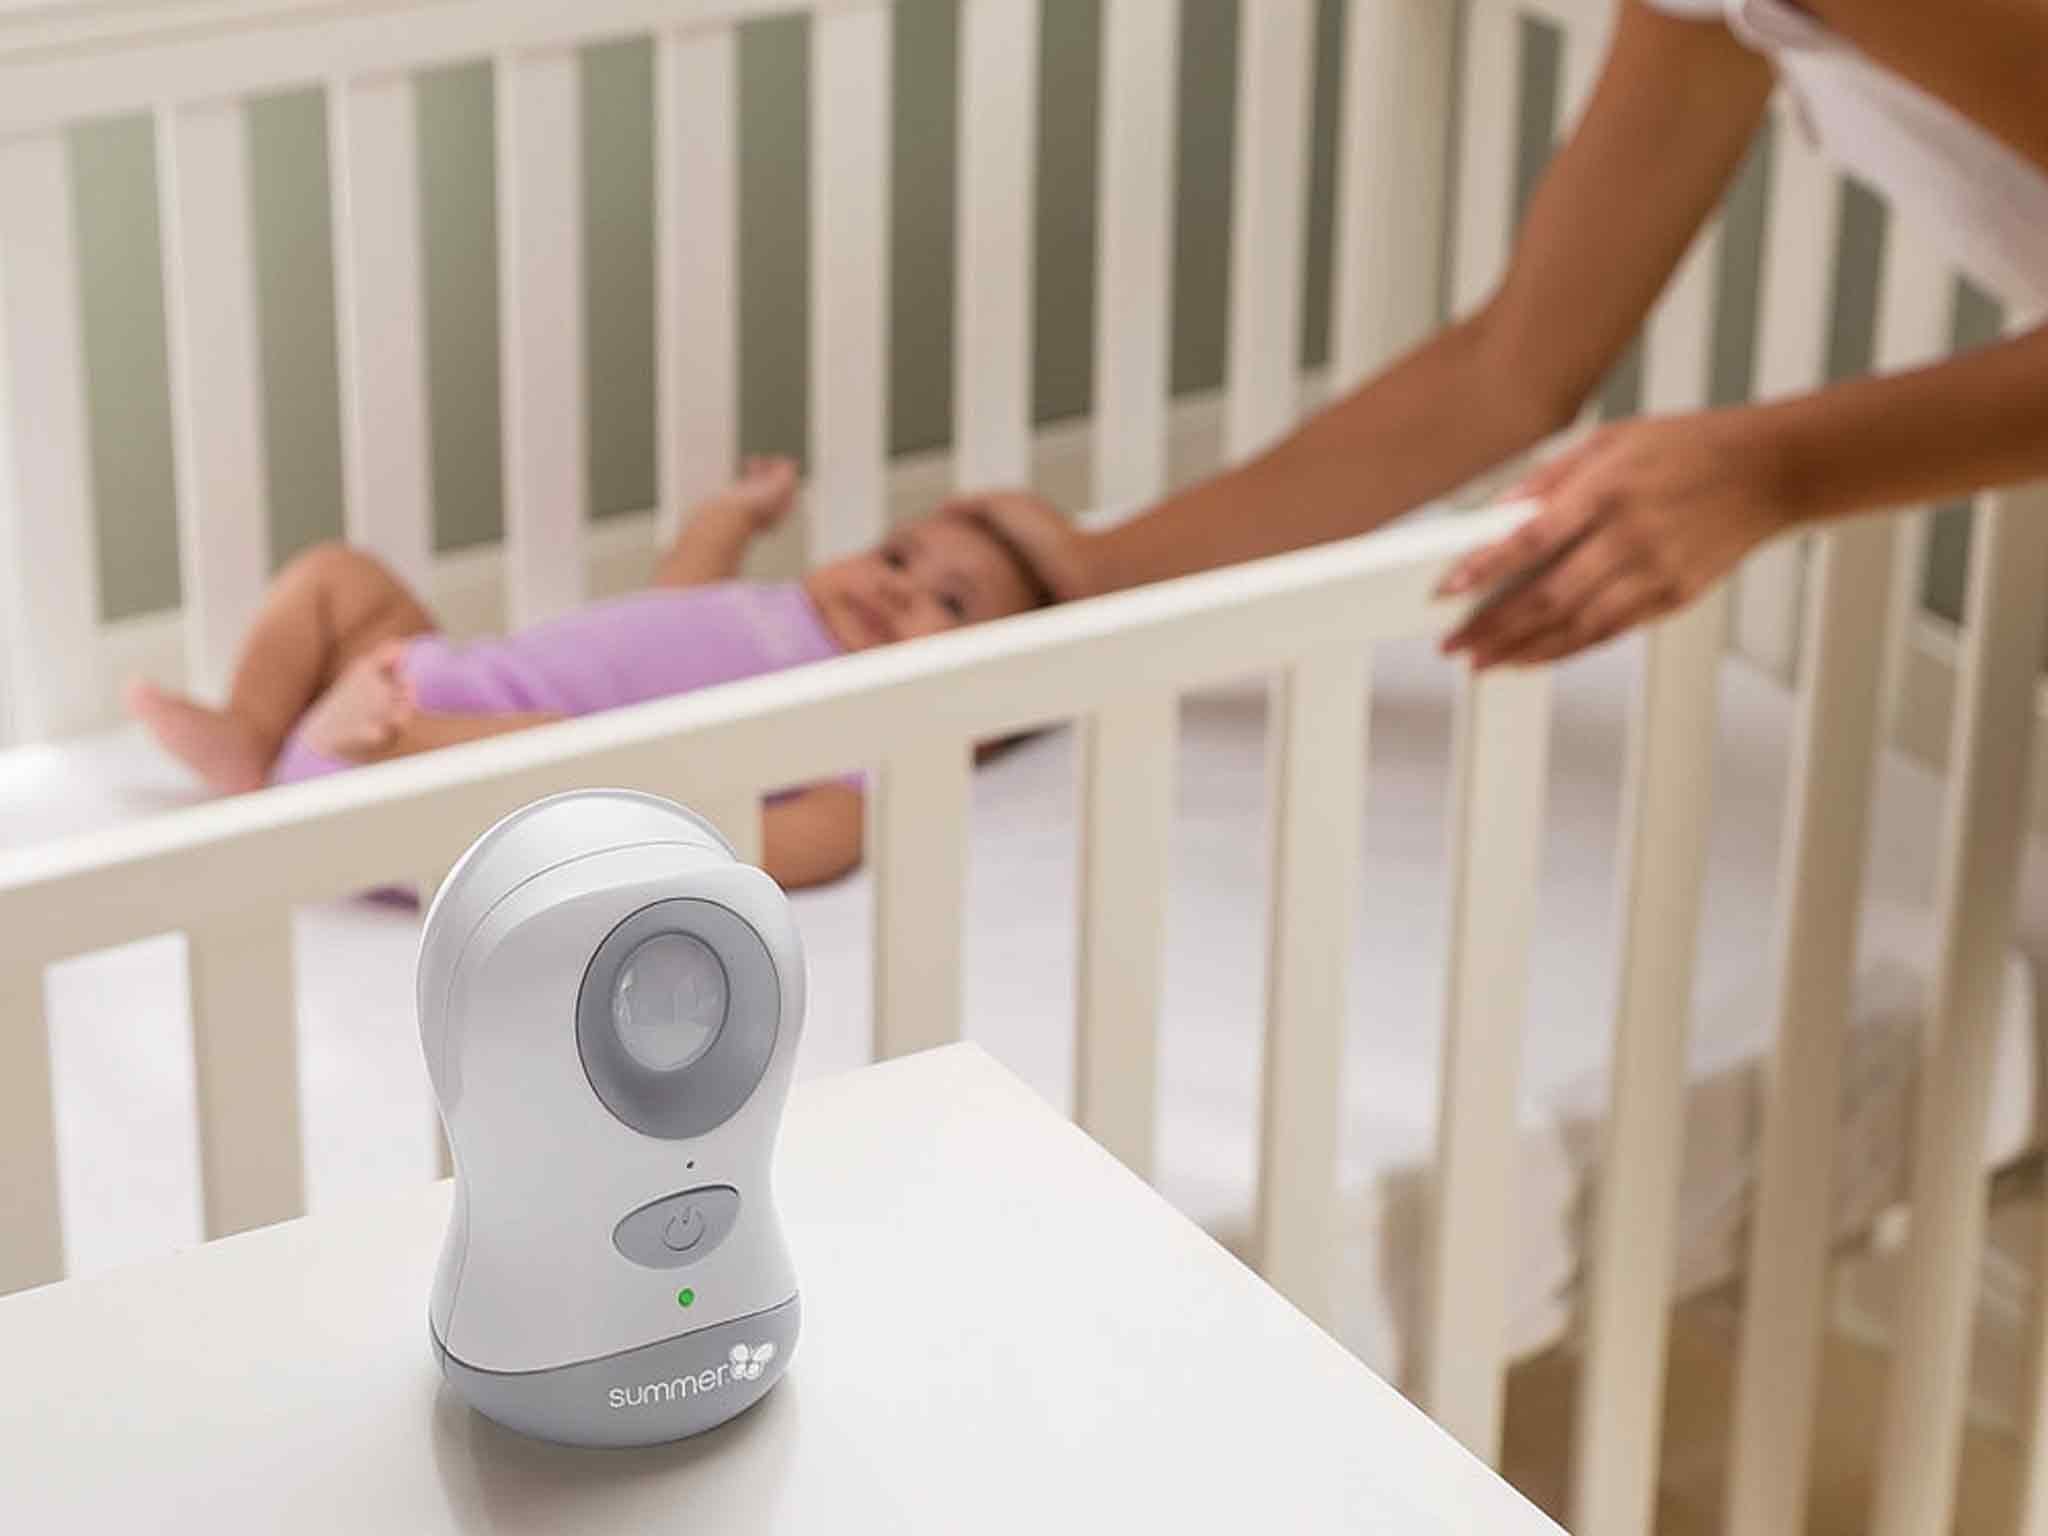 Baby monitors are among devices vulnerable to attack